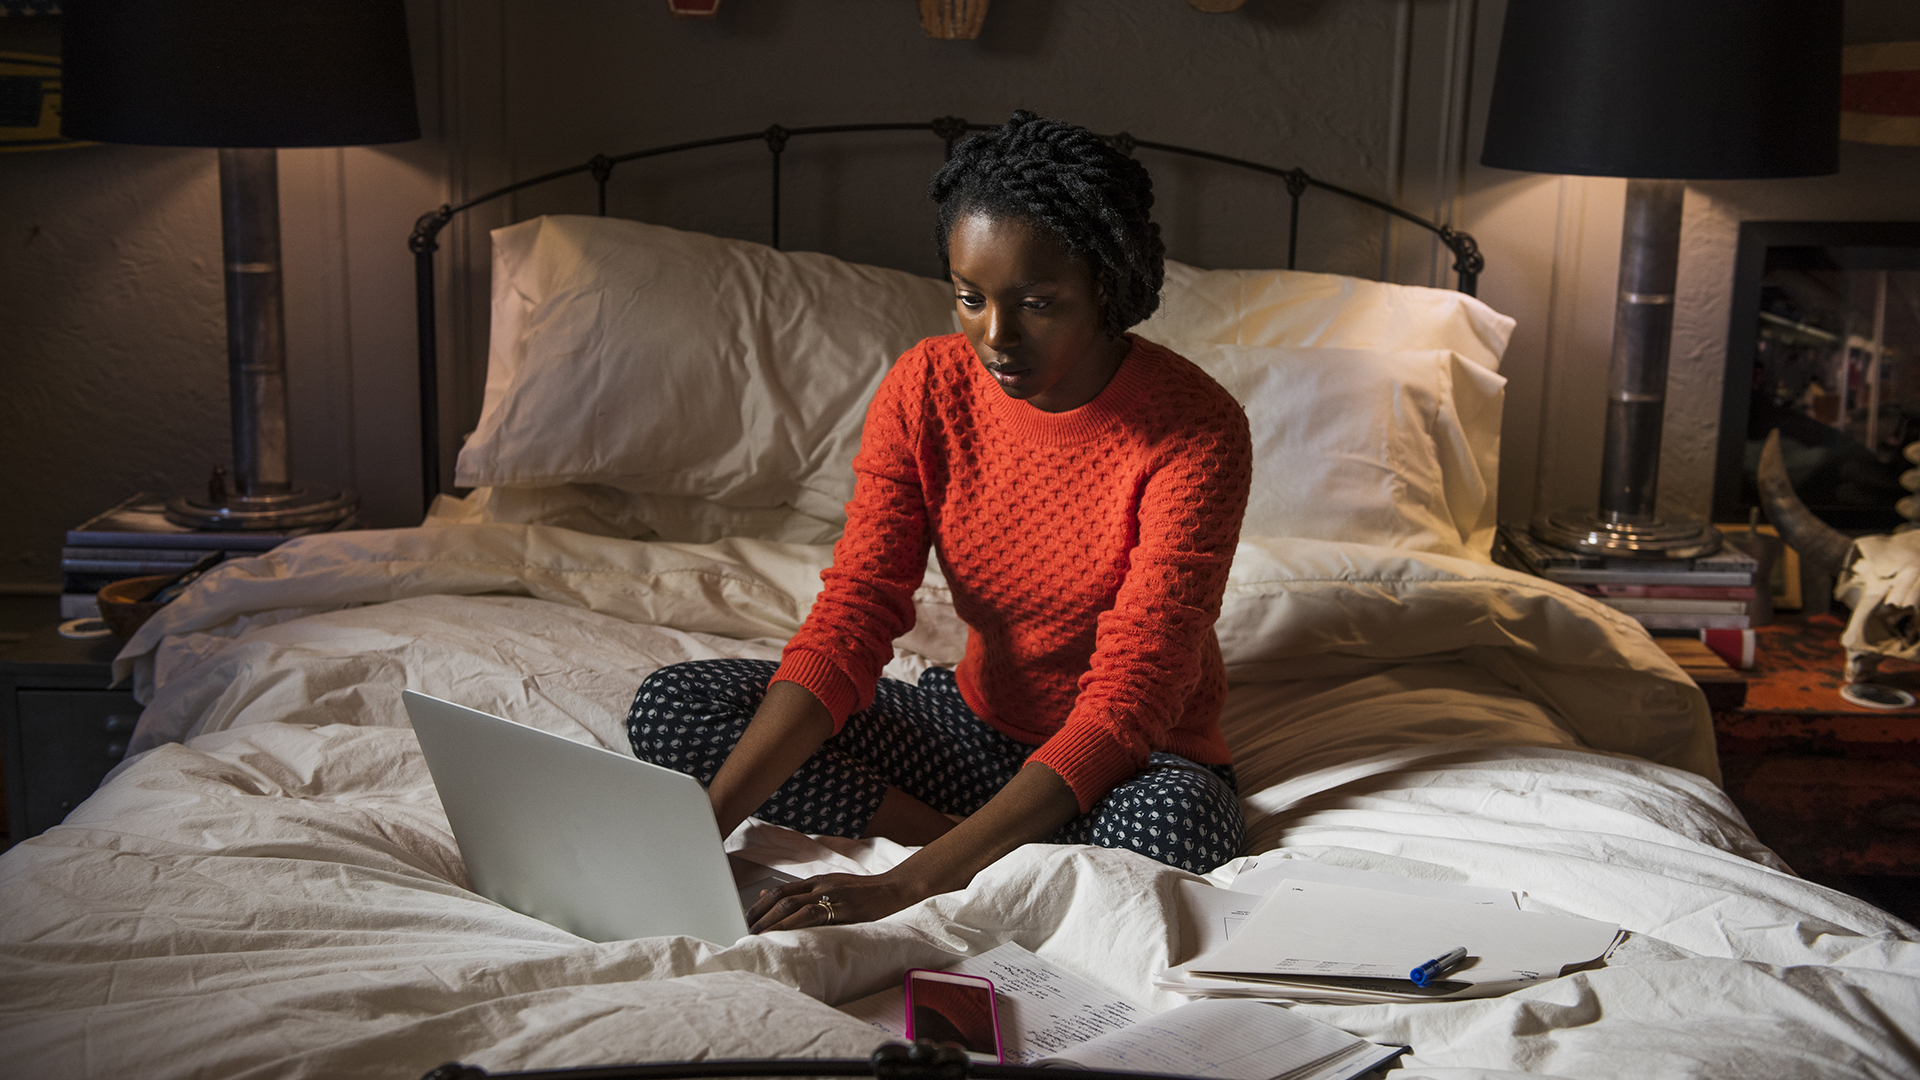 A woman sits on a bed in a dark room, typing on a laptop